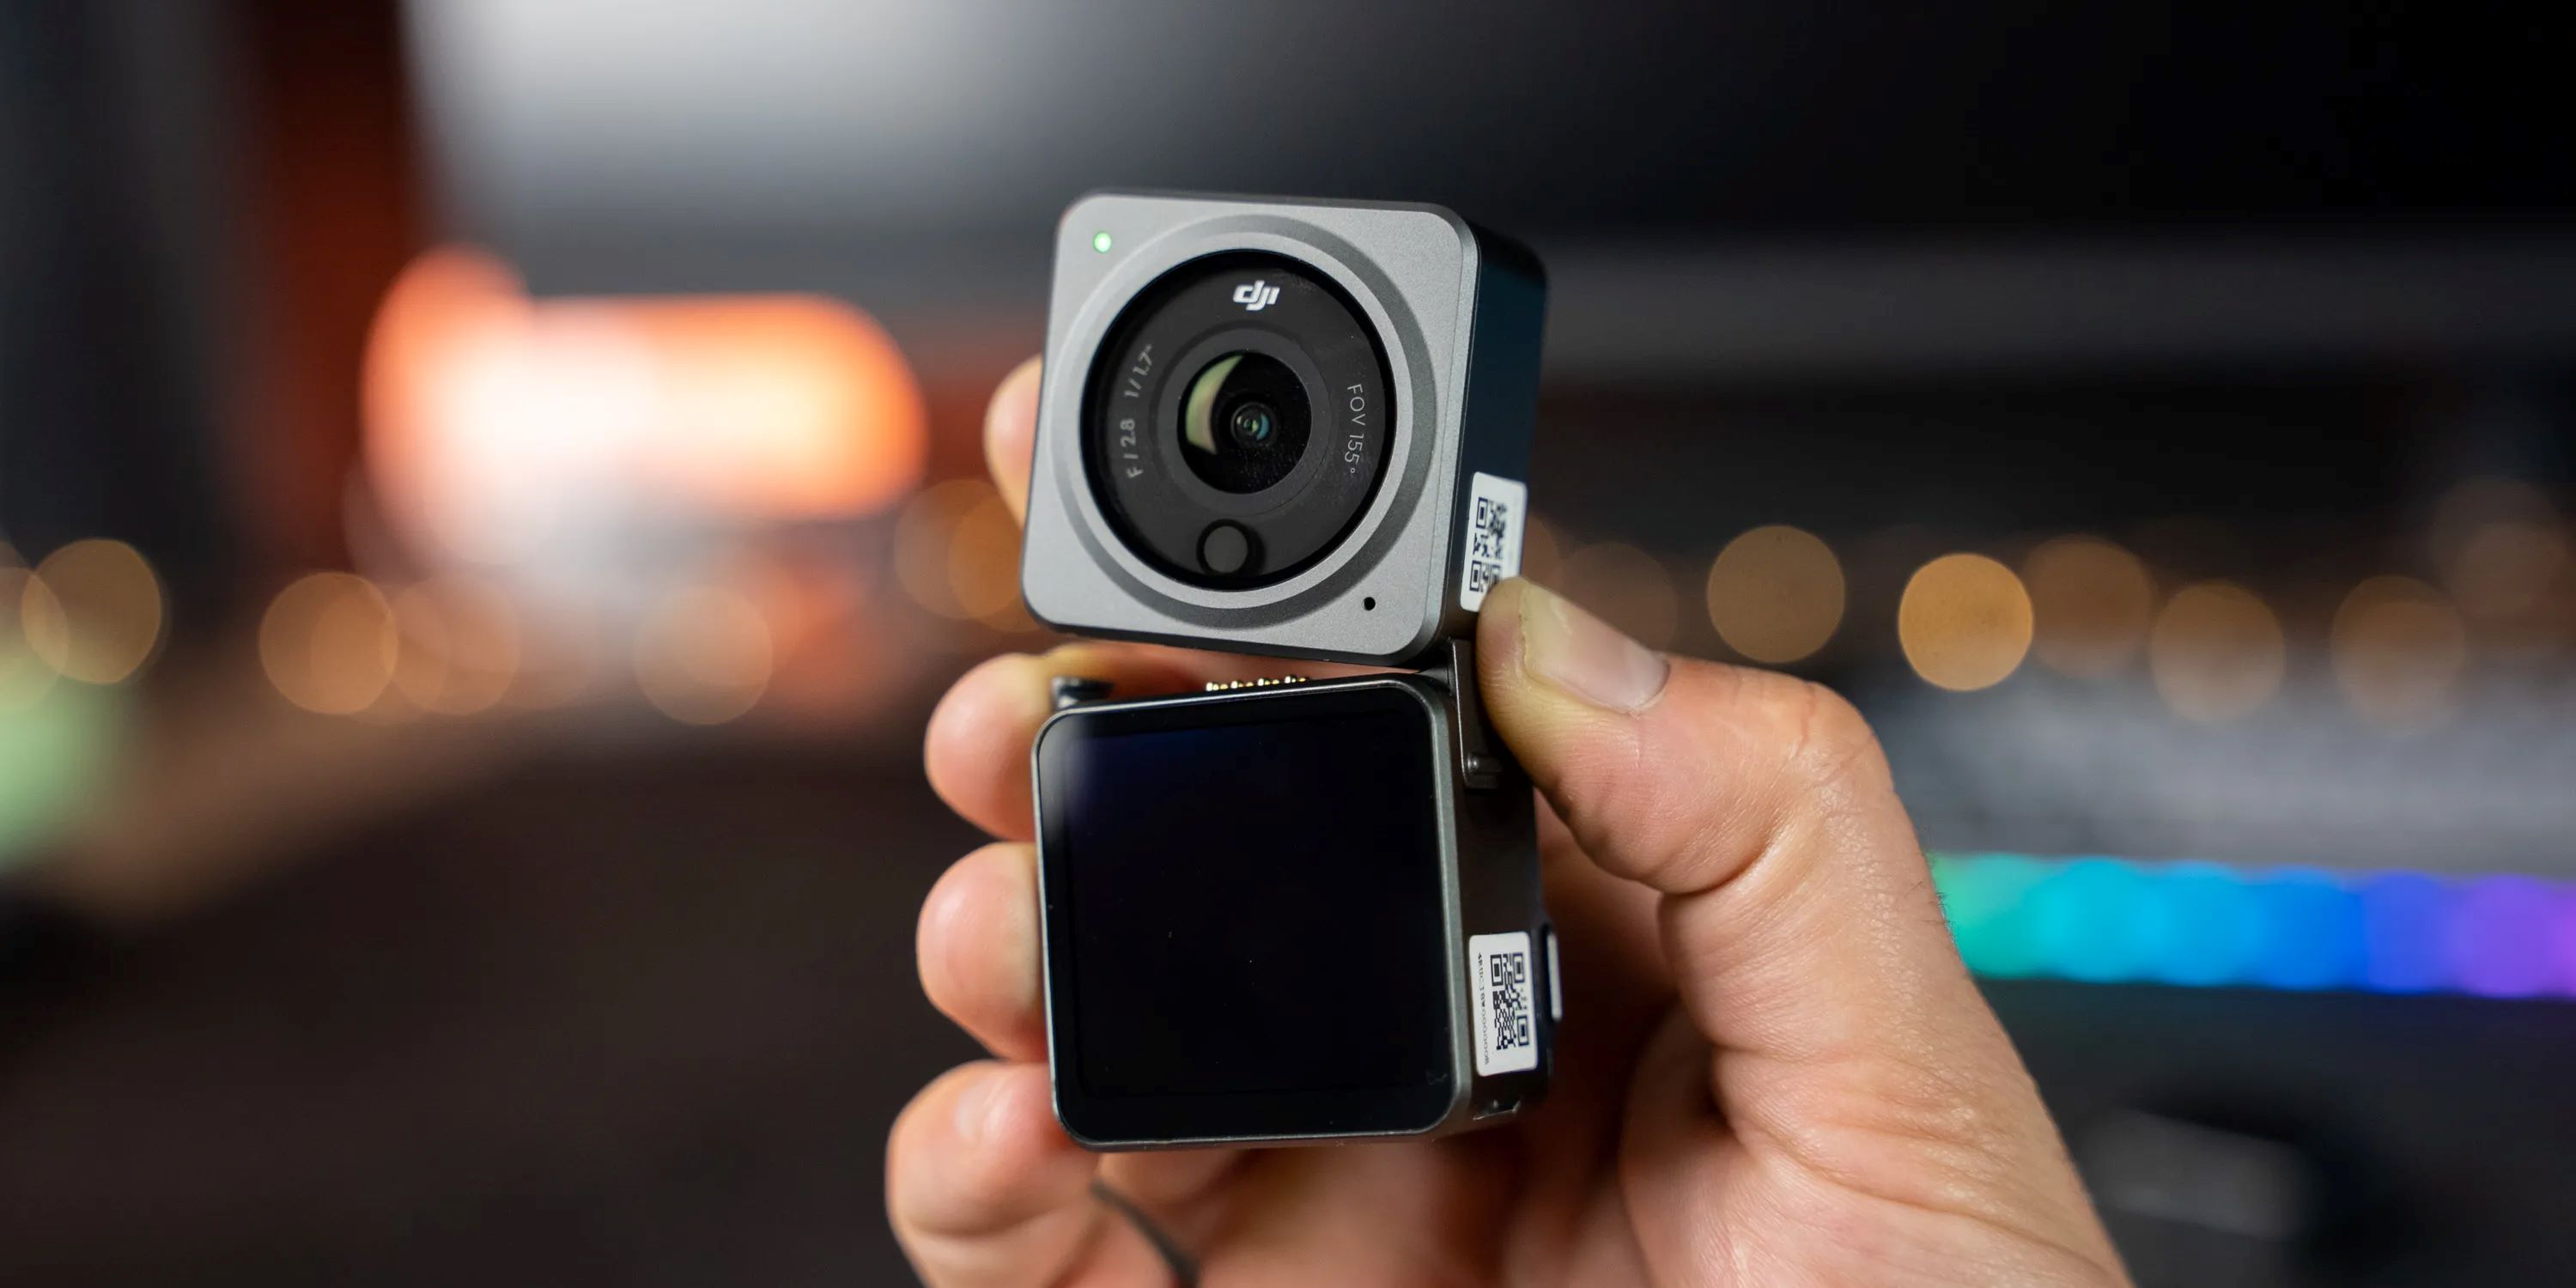 How To Use Motion Detection On Action Camera